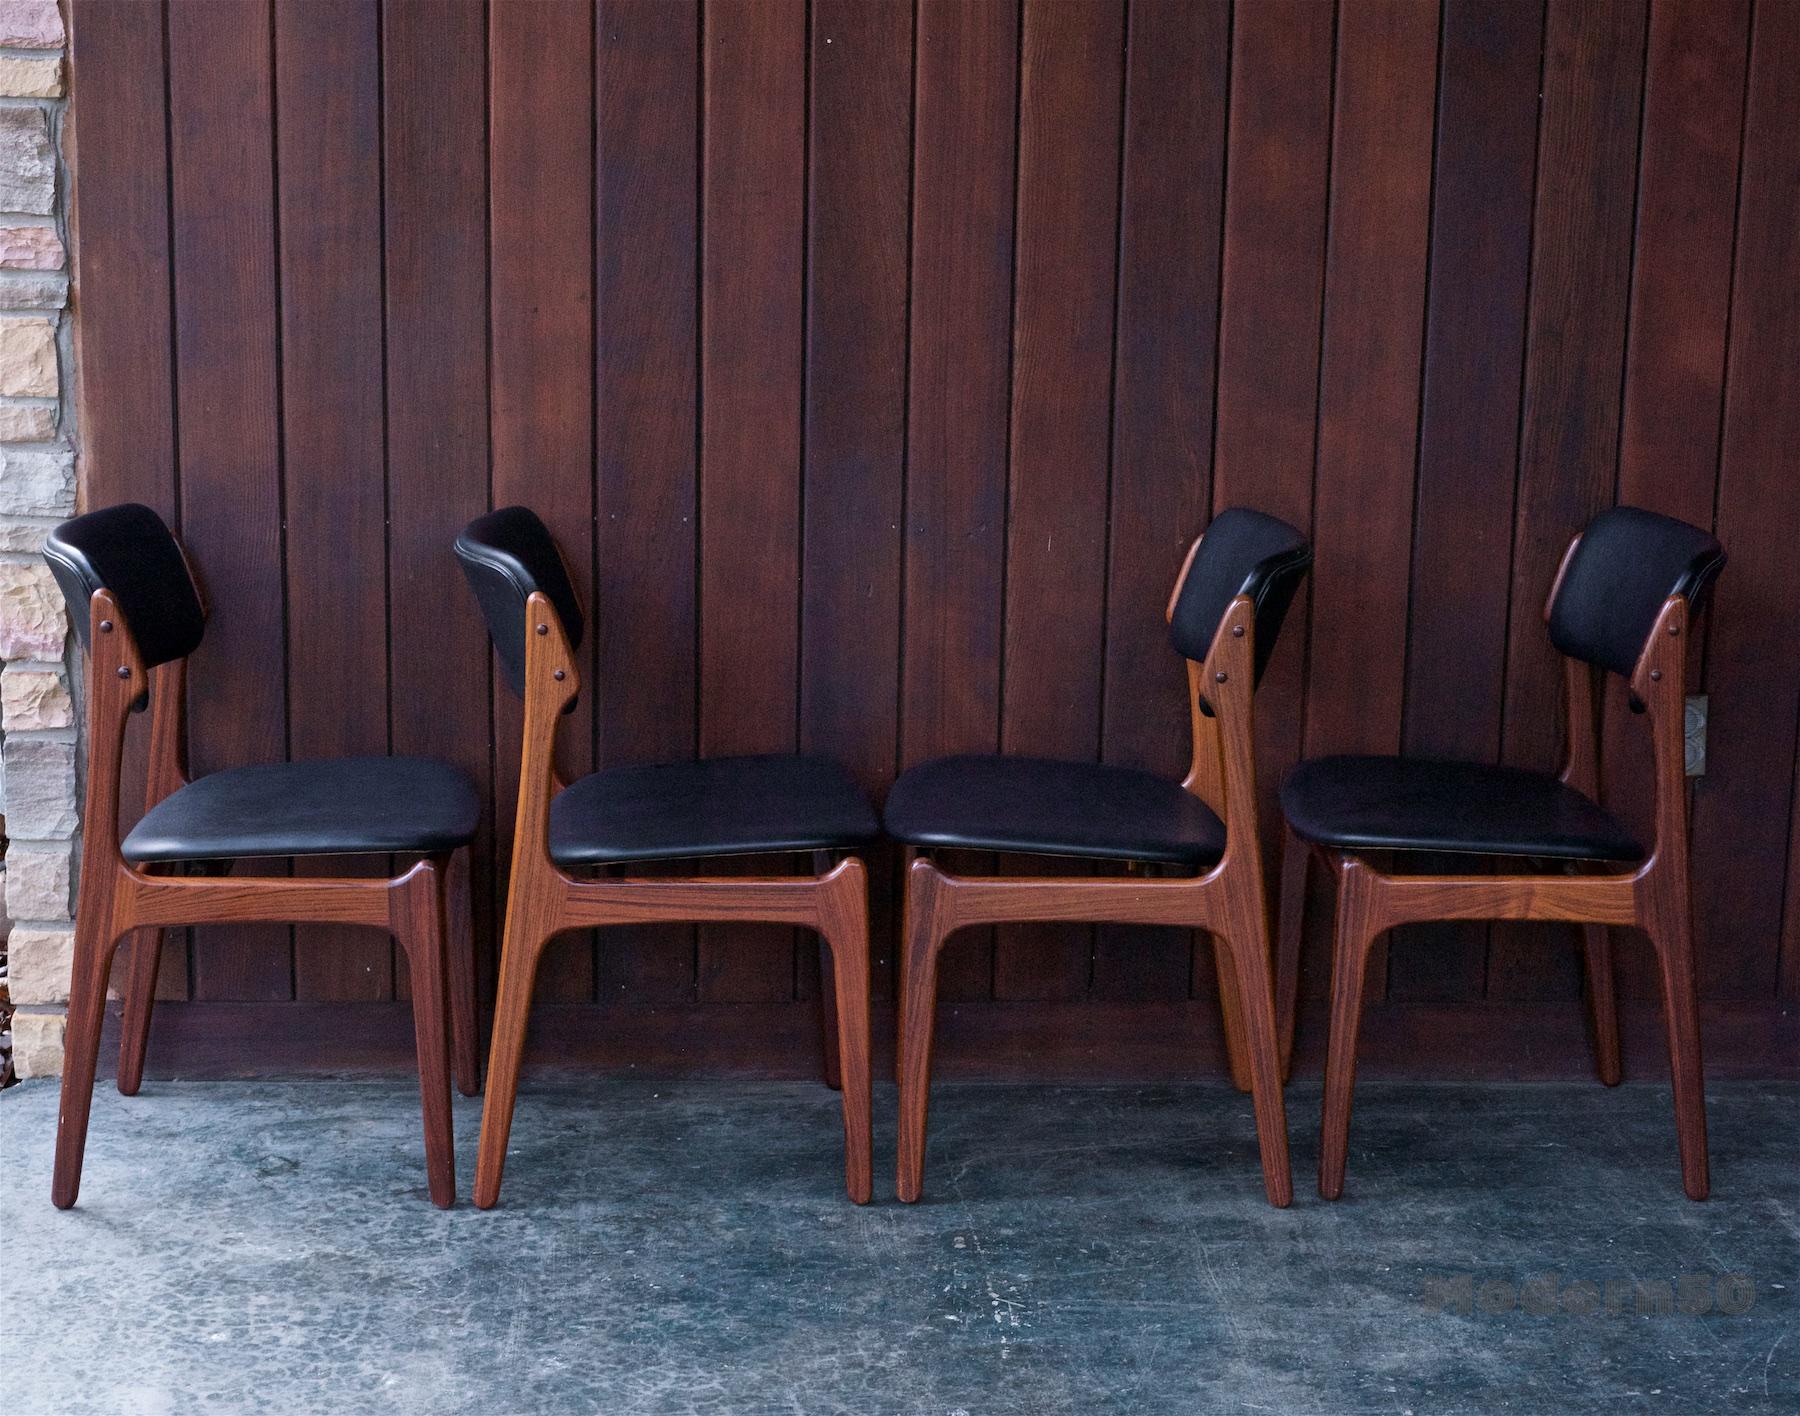 Four Erik Buch dining chairs model OD-49 by Oddense Maskinsnedkeri in Denmark. Ready to use. Rare solid Brazilian rosewood frames, and black vinyl.